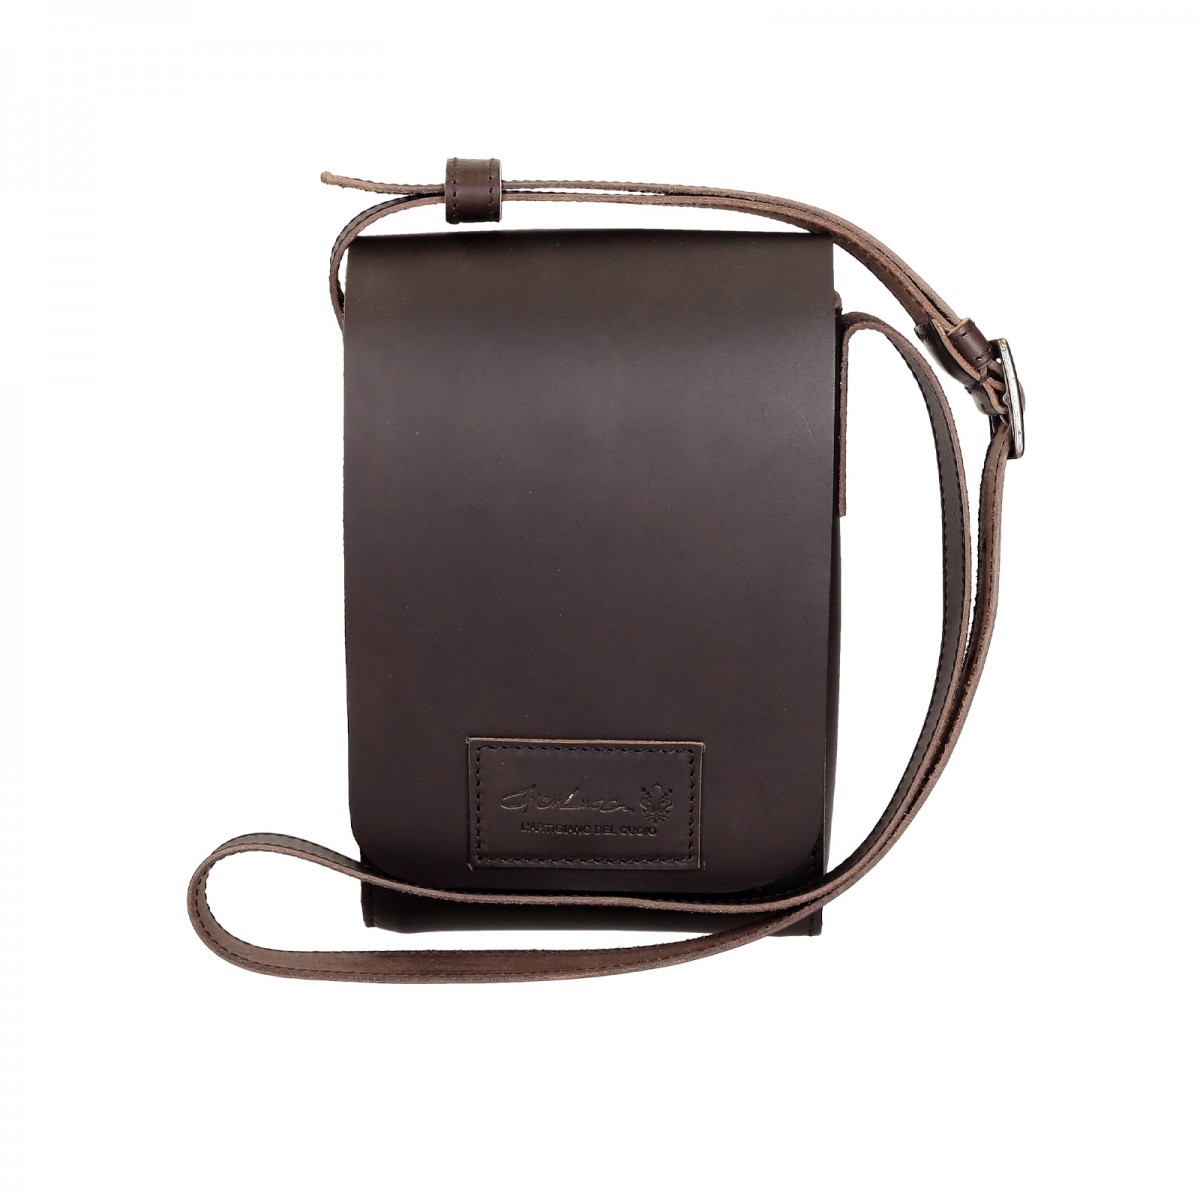 Brown leather cross body shoulder bag Handmade | Gianluca - The leather craftsman